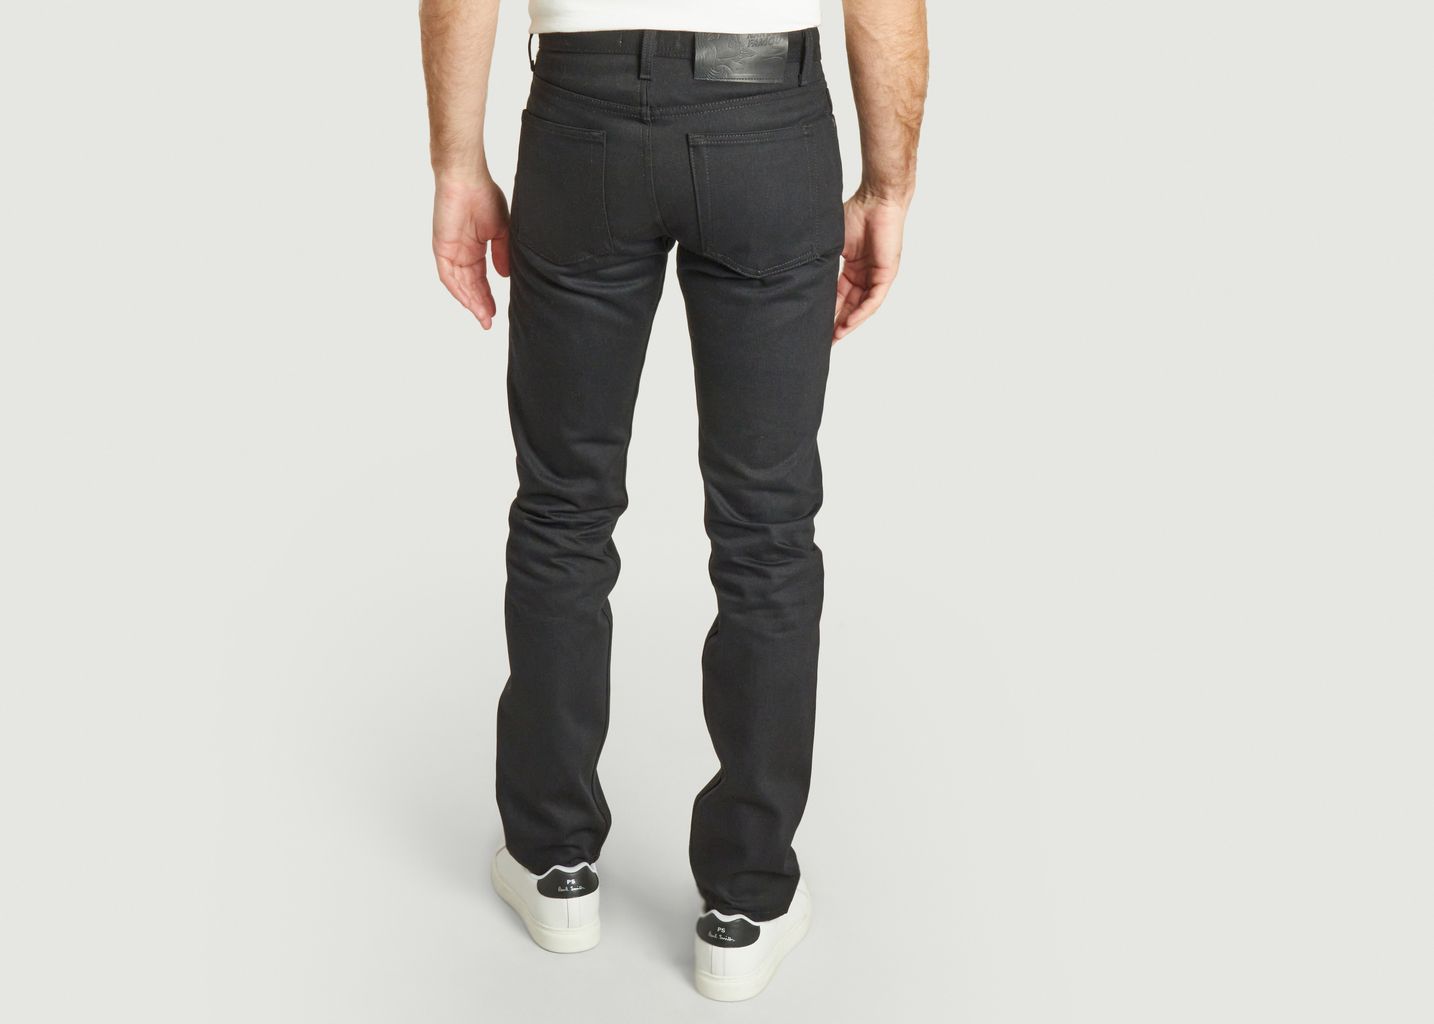 Jean weird Guy selvedge - Naked and Famous